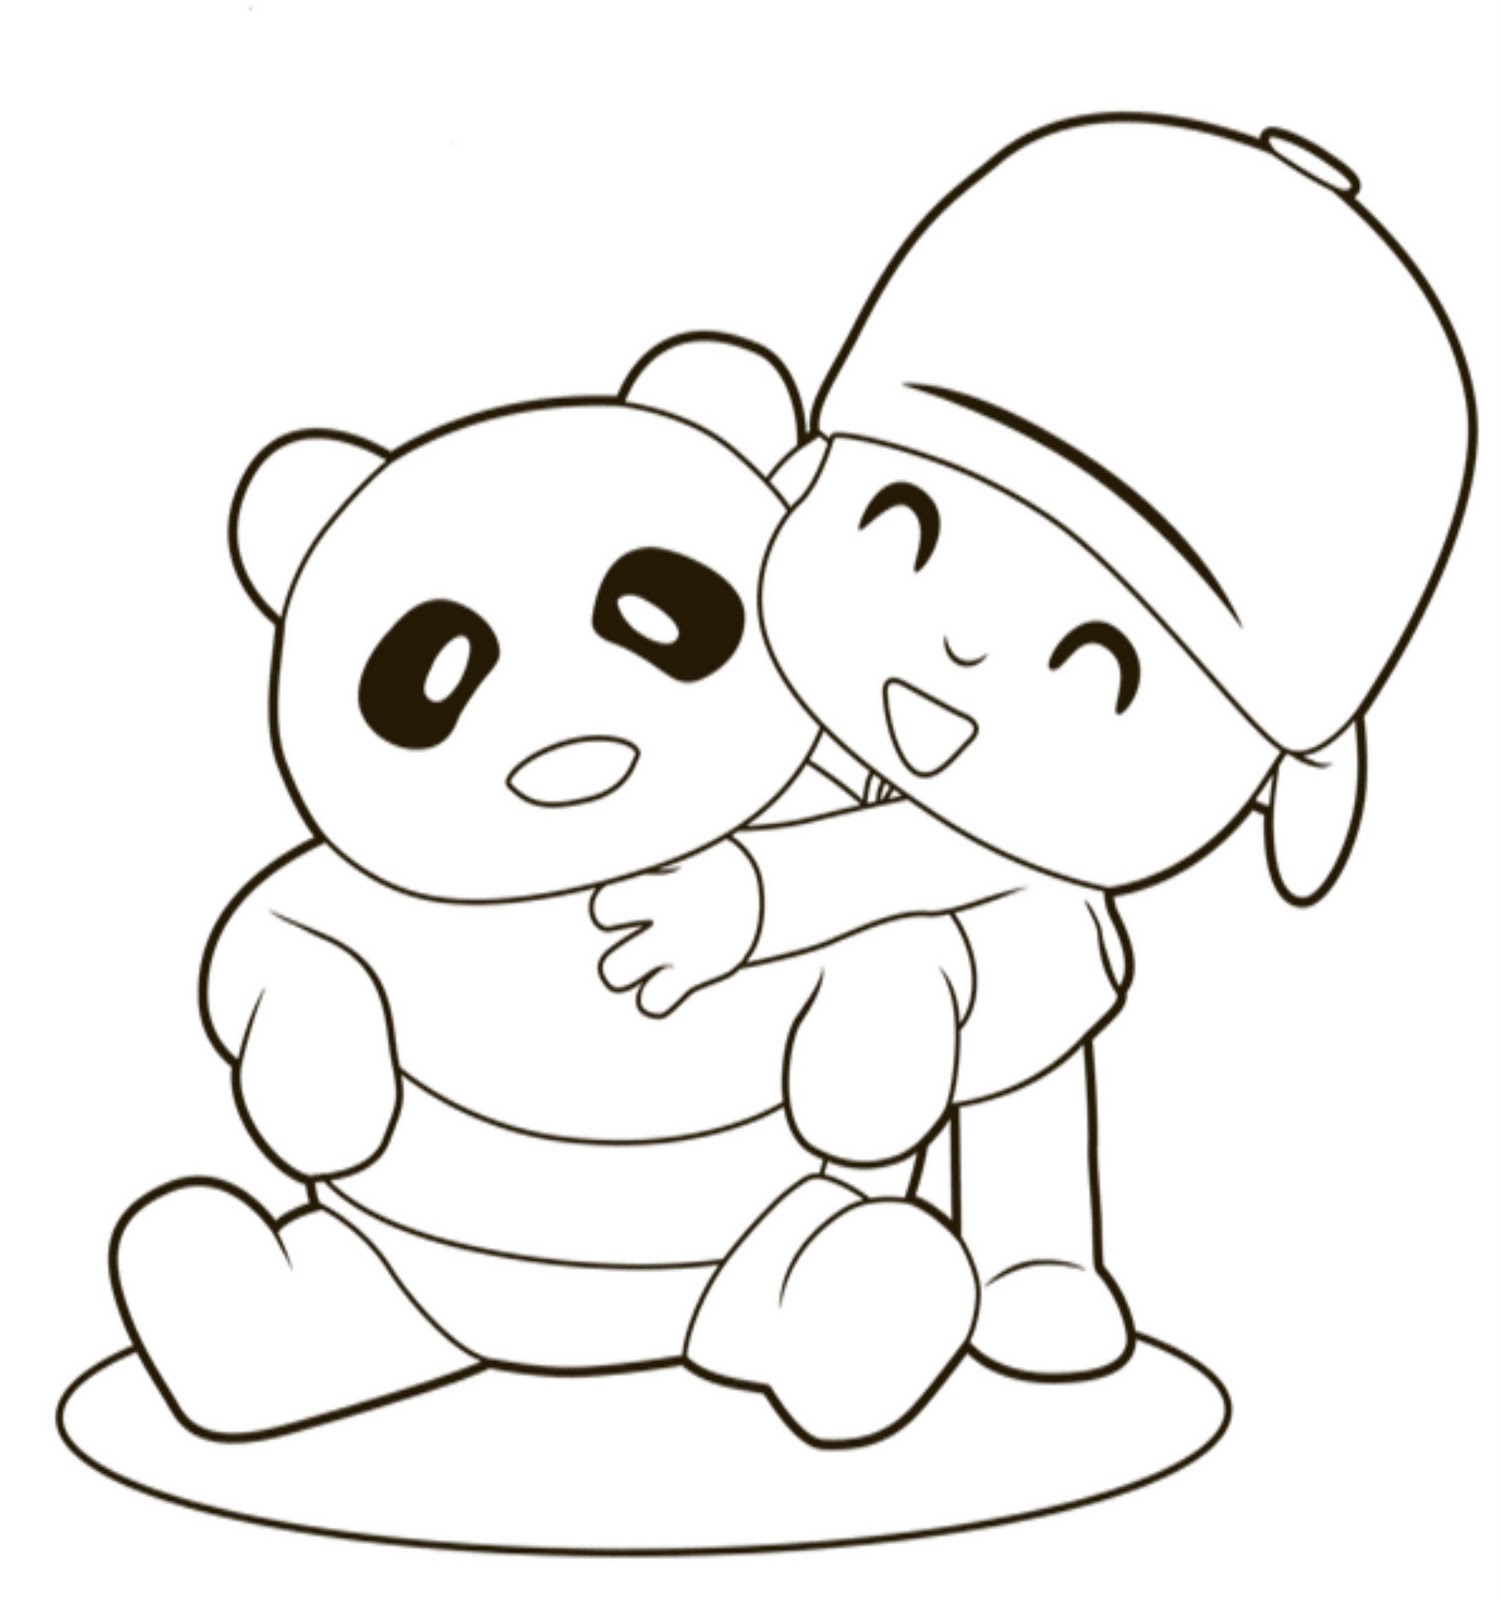 Drawings To Paint & Colour Pocoyo - Print Design 018